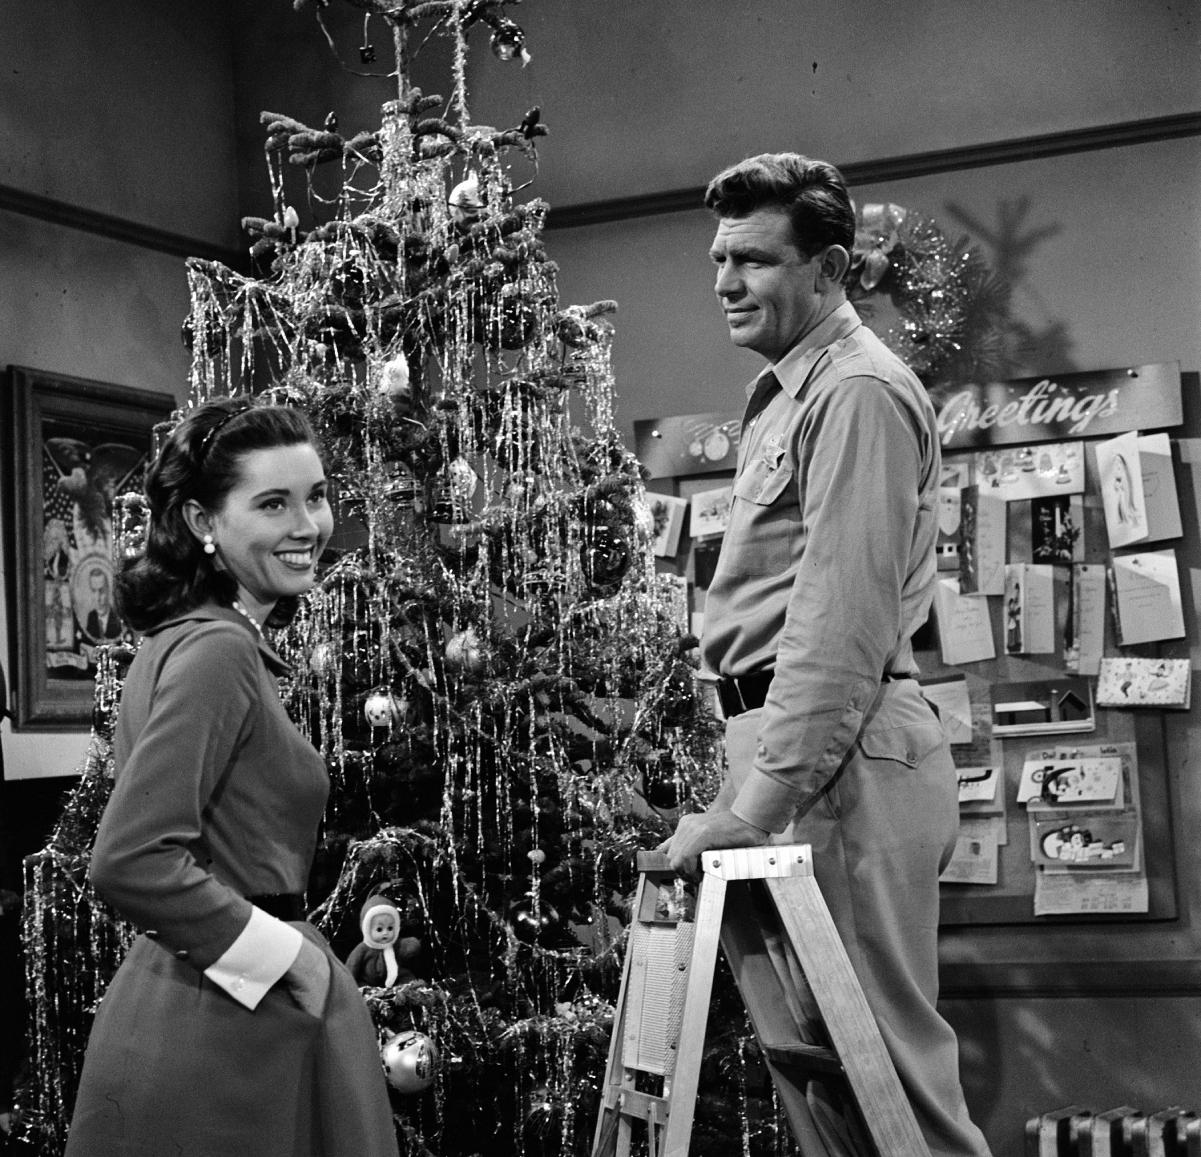 (L to R): Actor Elinor Donahue as Ellie Walker and Andy Griffith as Sheriff Andy Taylor decorate a Christmas tree in a scene from